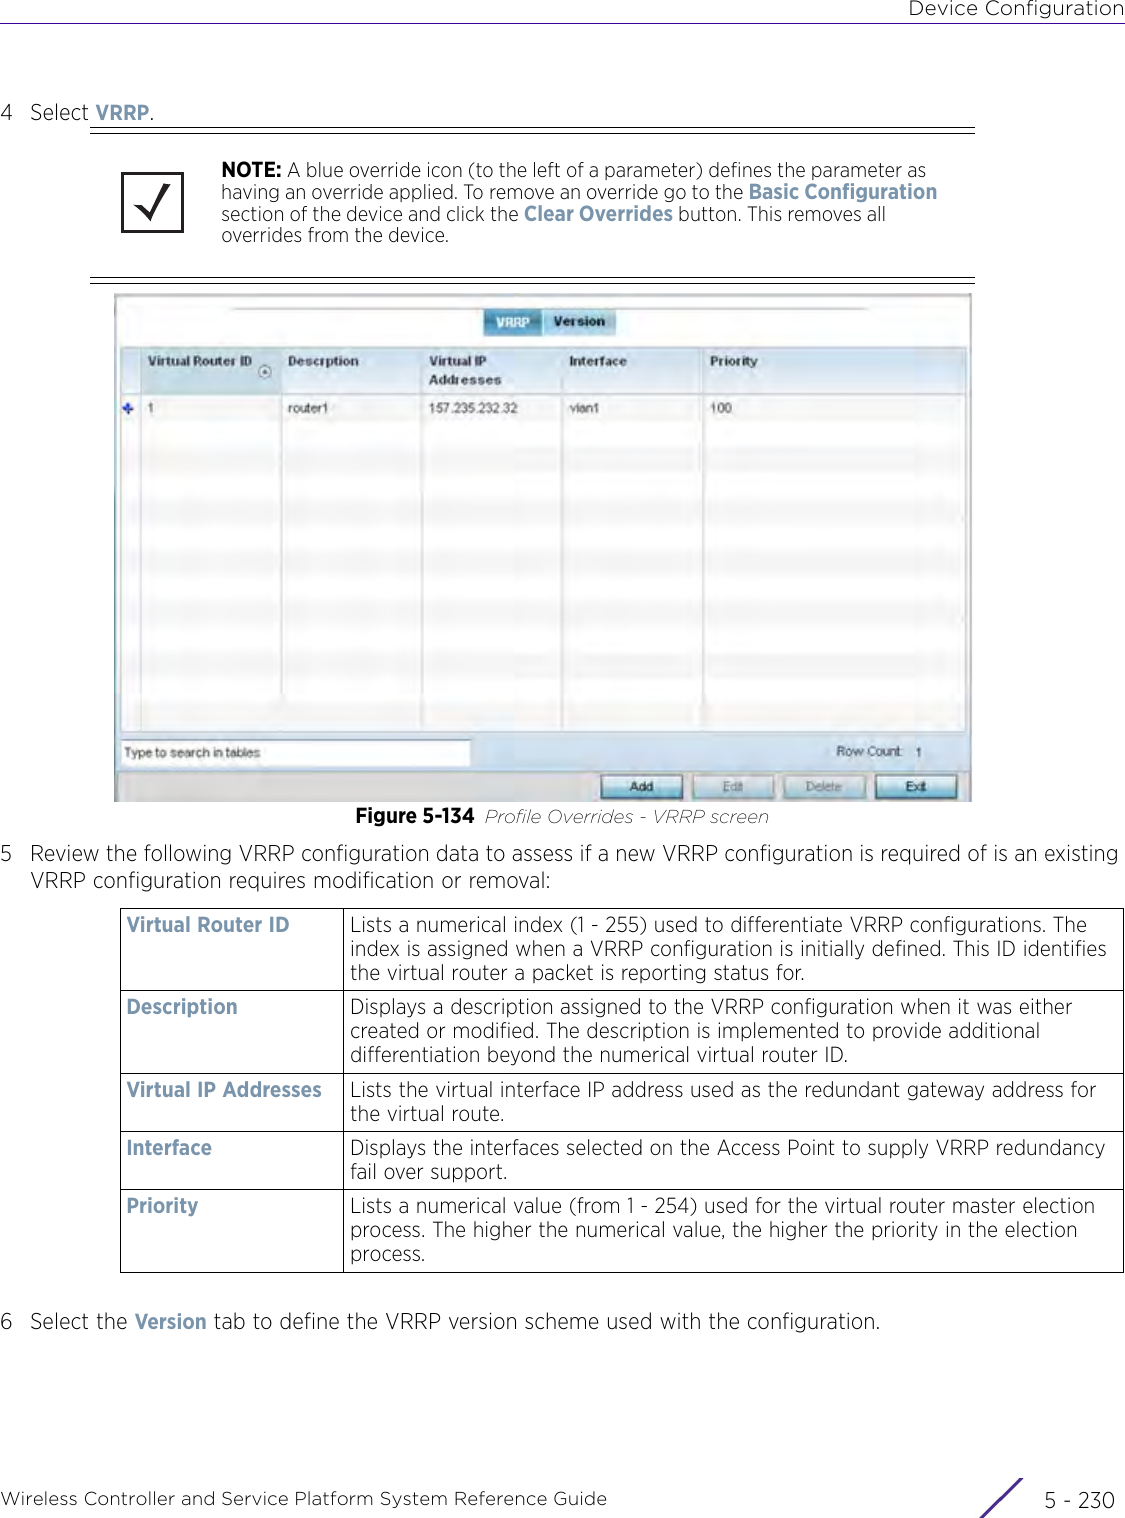 Device ConfigurationWireless Controller and Service Platform System Reference Guide  5 - 2304Select VRRP.Figure 5-134 Profile Overrides - VRRP screen5 Review the following VRRP configuration data to assess if a new VRRP configuration is required of is an existing VRRP configuration requires modification or removal: 6 Select the Version tab to define the VRRP version scheme used with the configuration.NOTE: A blue override icon (to the left of a parameter) defines the parameter as having an override applied. To remove an override go to the Basic Configuration section of the device and click the Clear Overrides button. This removes all overrides from the device.Virtual Router ID Lists a numerical index (1 - 255) used to differentiate VRRP configurations. The index is assigned when a VRRP configuration is initially defined. This ID identifies the virtual router a packet is reporting status for.Description Displays a description assigned to the VRRP configuration when it was either created or modified. The description is implemented to provide additional differentiation beyond the numerical virtual router ID.Virtual IP Addresses Lists the virtual interface IP address used as the redundant gateway address for the virtual route.Interface  Displays the interfaces selected on the Access Point to supply VRRP redundancy fail over support.Priority Lists a numerical value (from 1 - 254) used for the virtual router master election process. The higher the numerical value, the higher the priority in the election process.